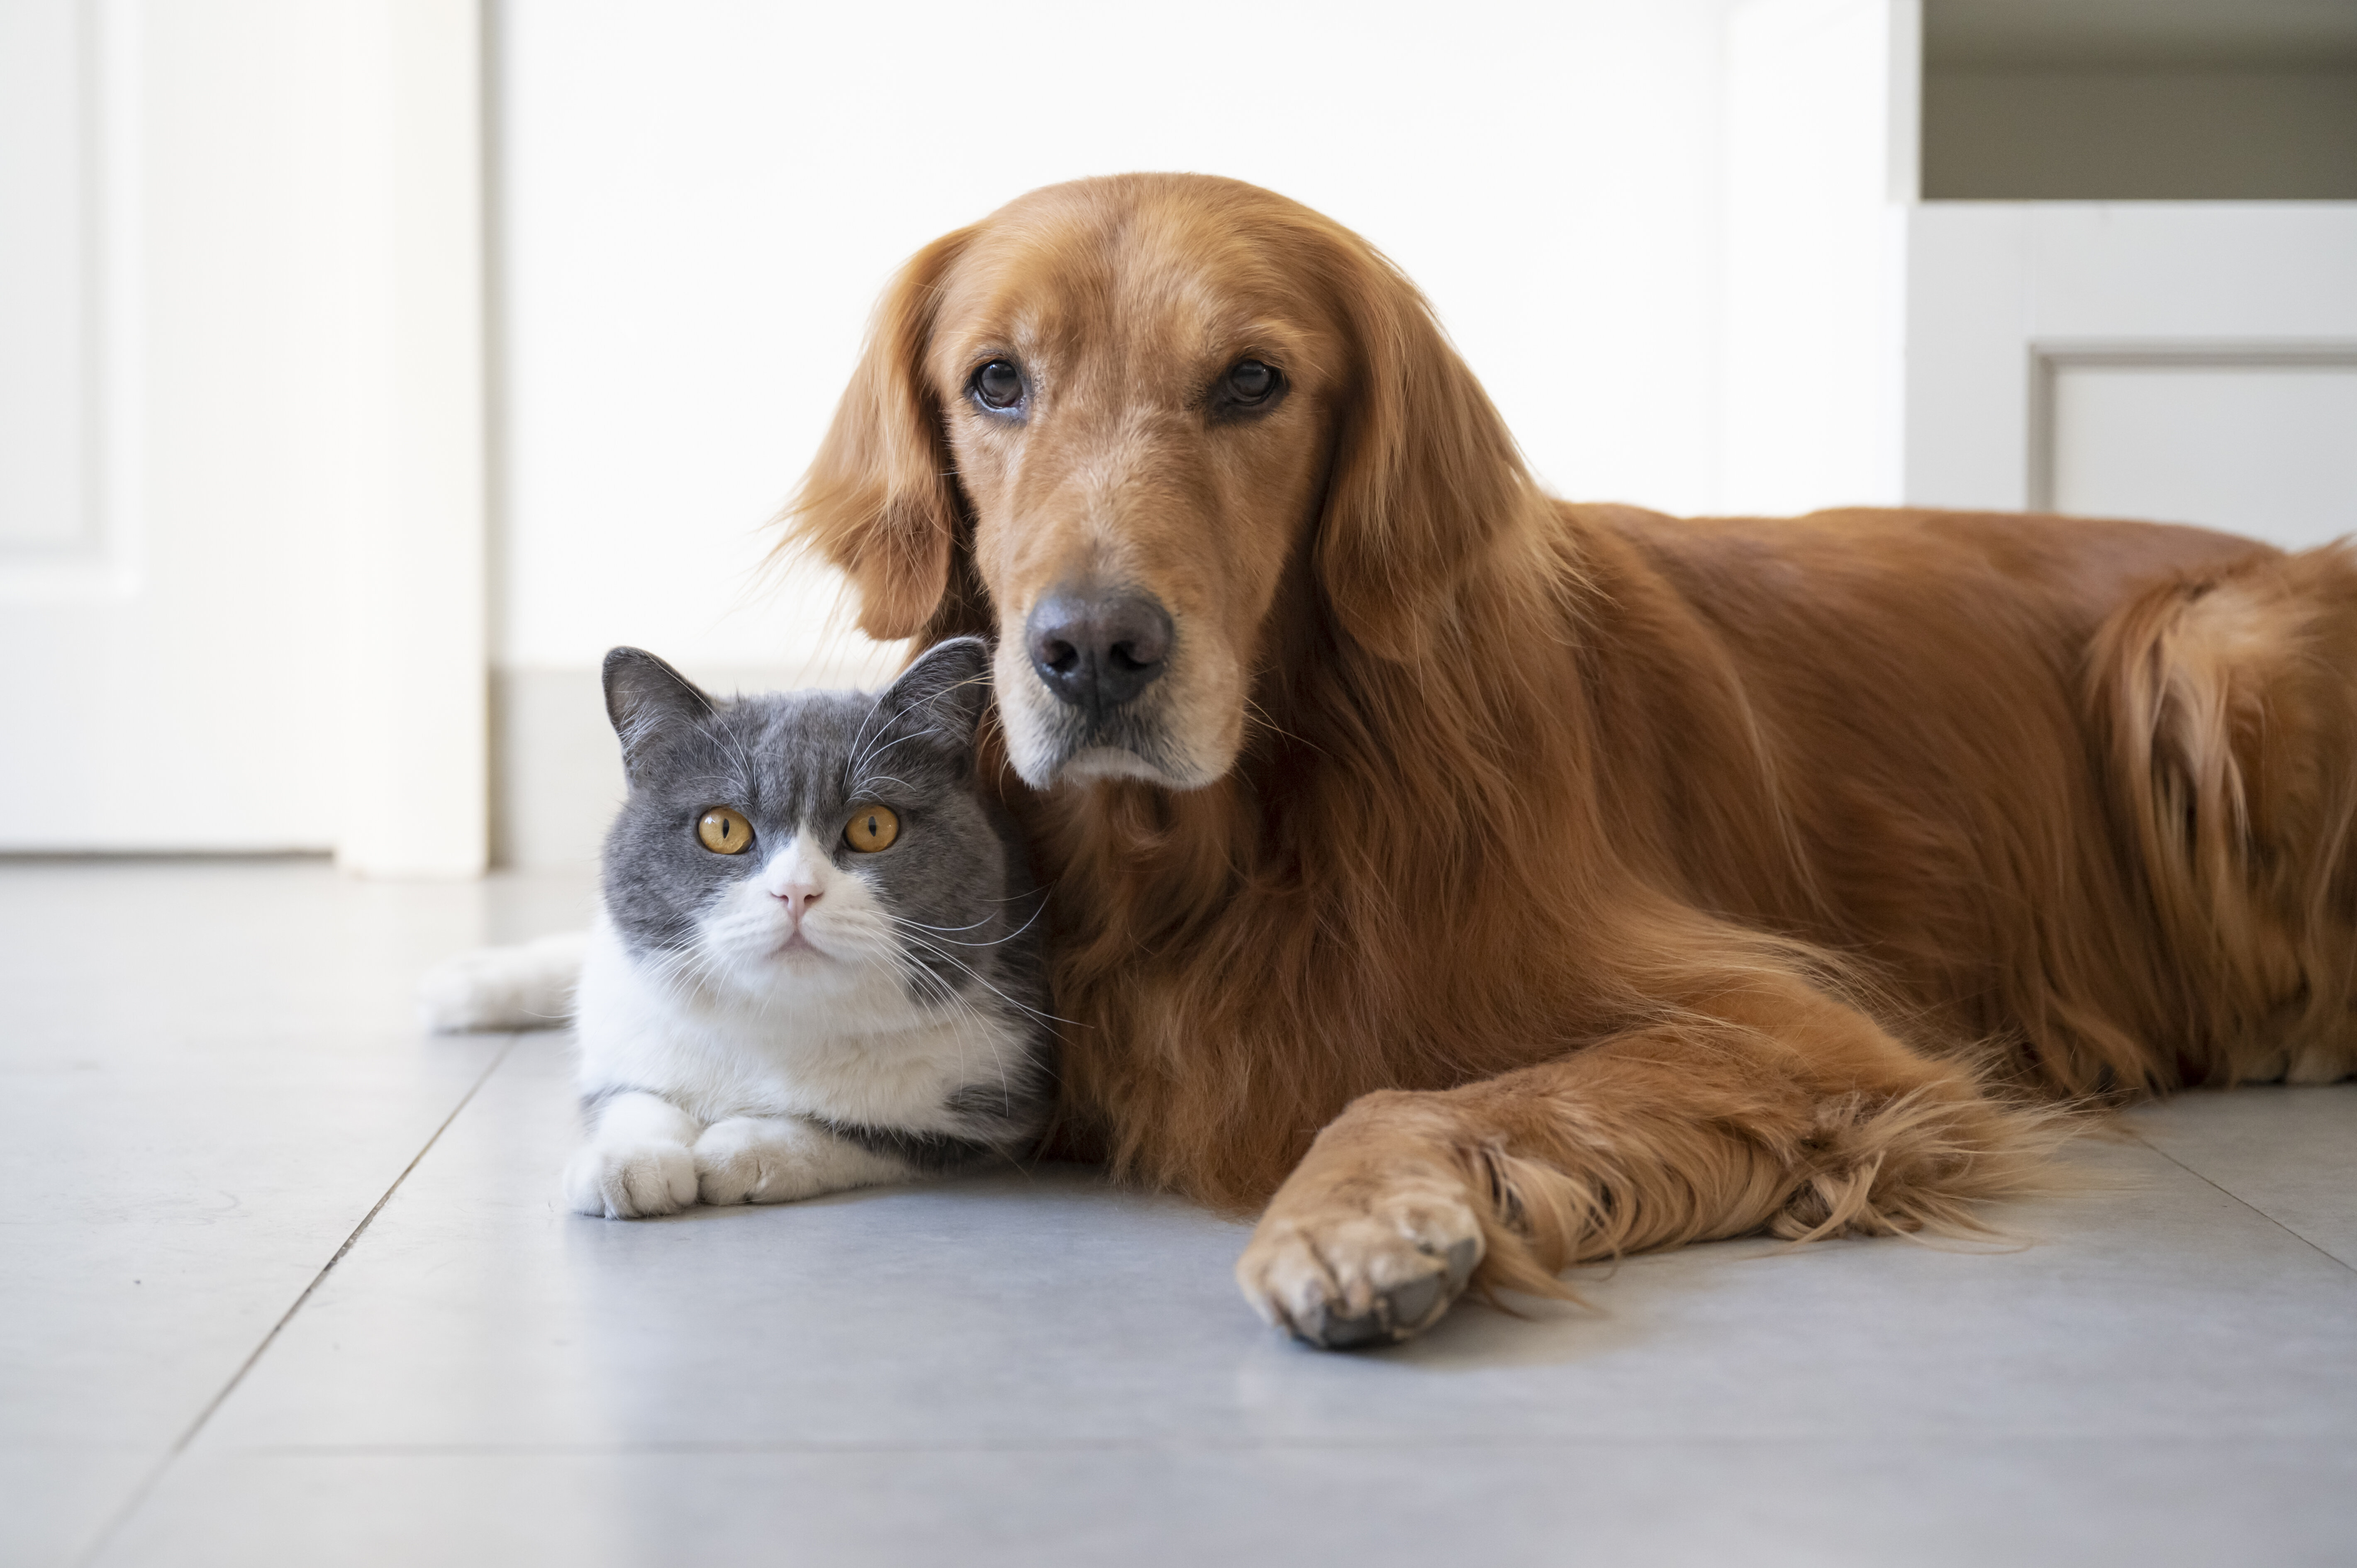 Want To Hire A Pet-Sitting Service? Heres What To Ask Them